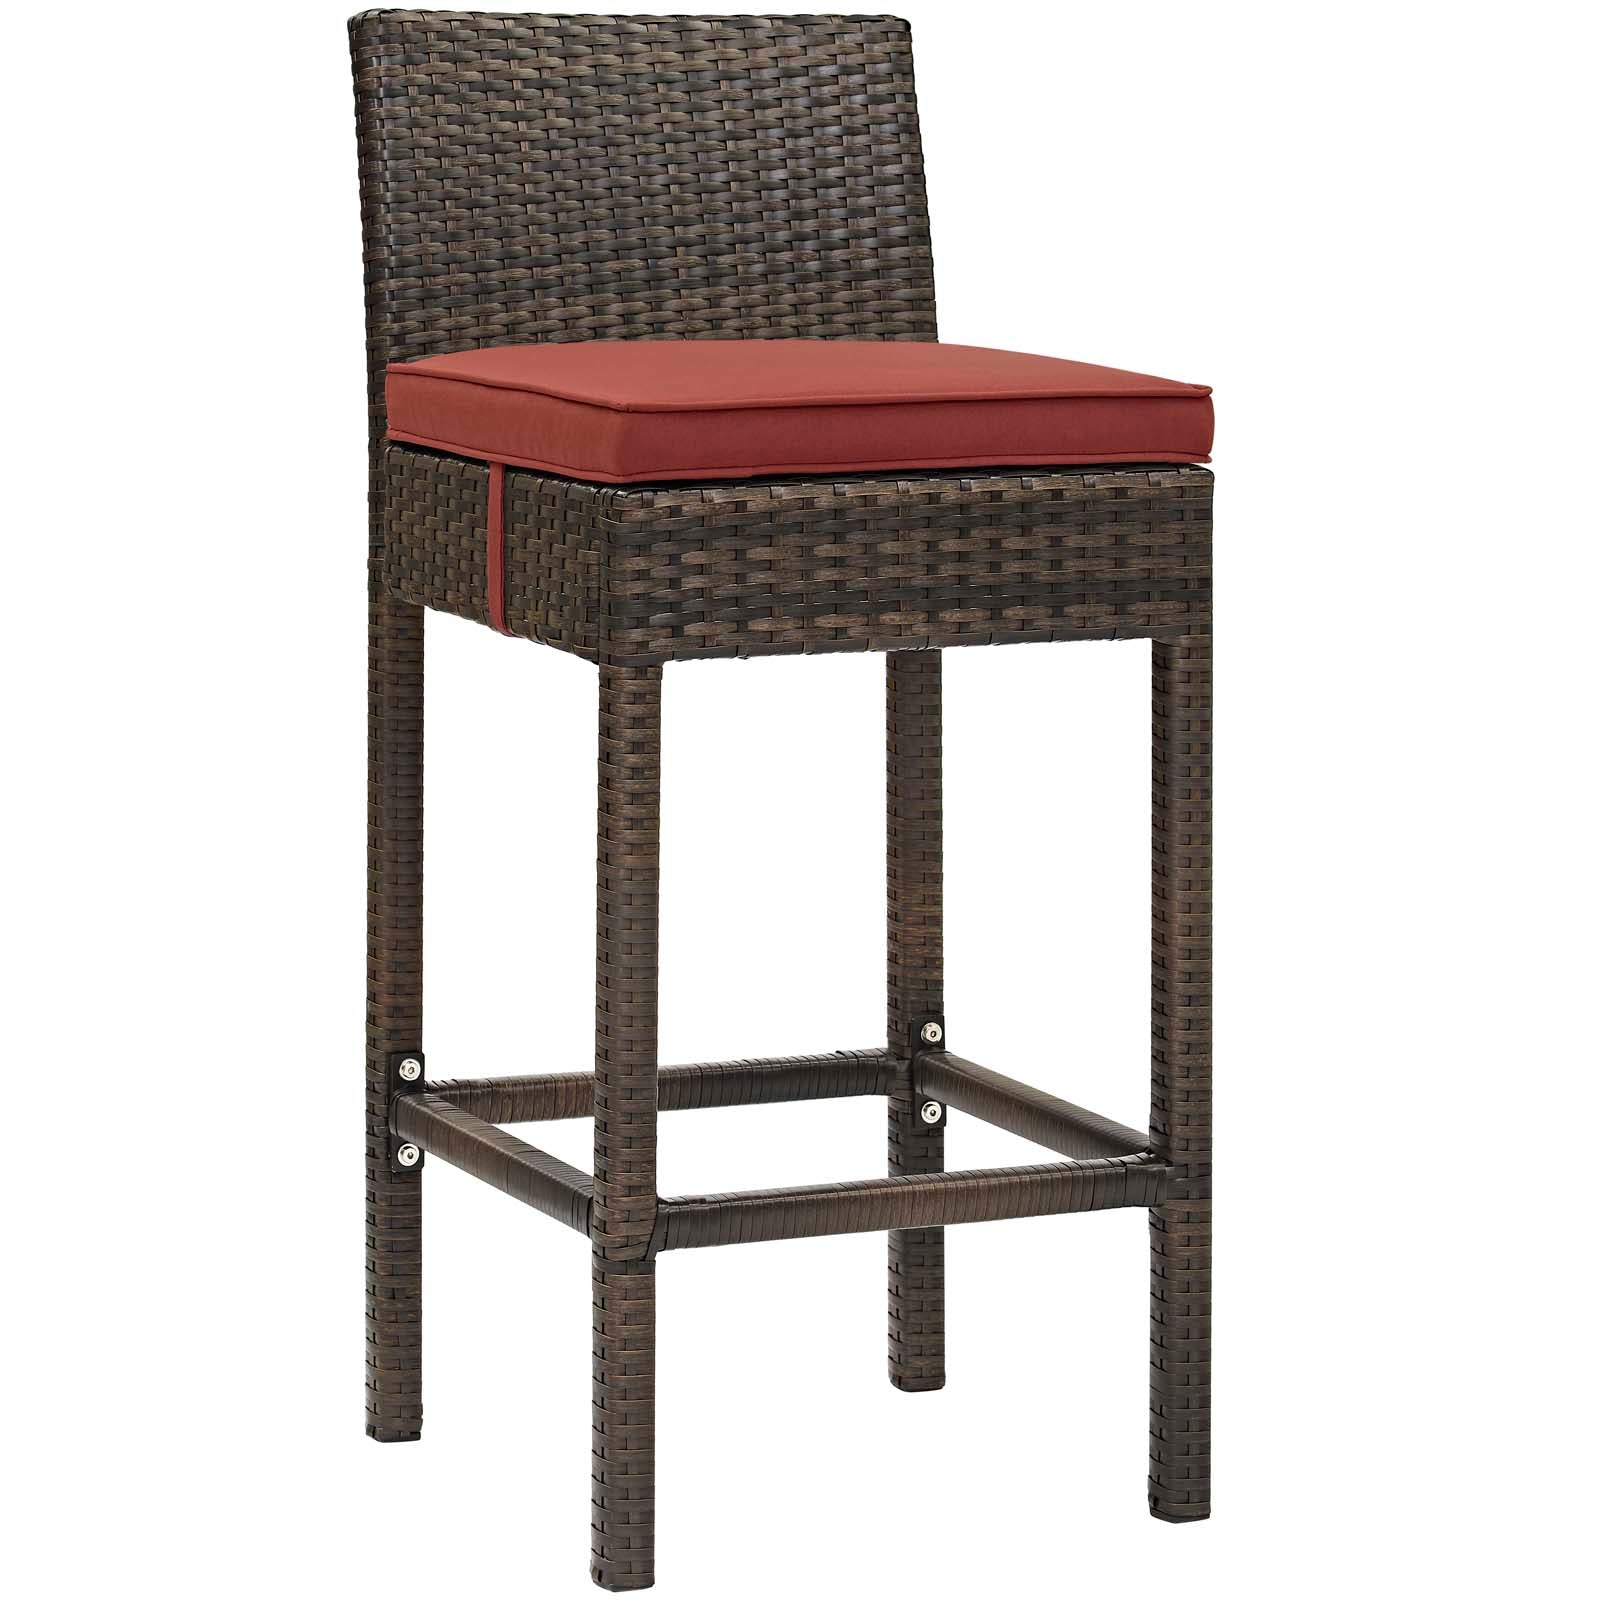 Modway Outdoor Barstools - Conduit Bar Stool Outdoor Patio Wicker Rattan Set of 2 Brown Currant